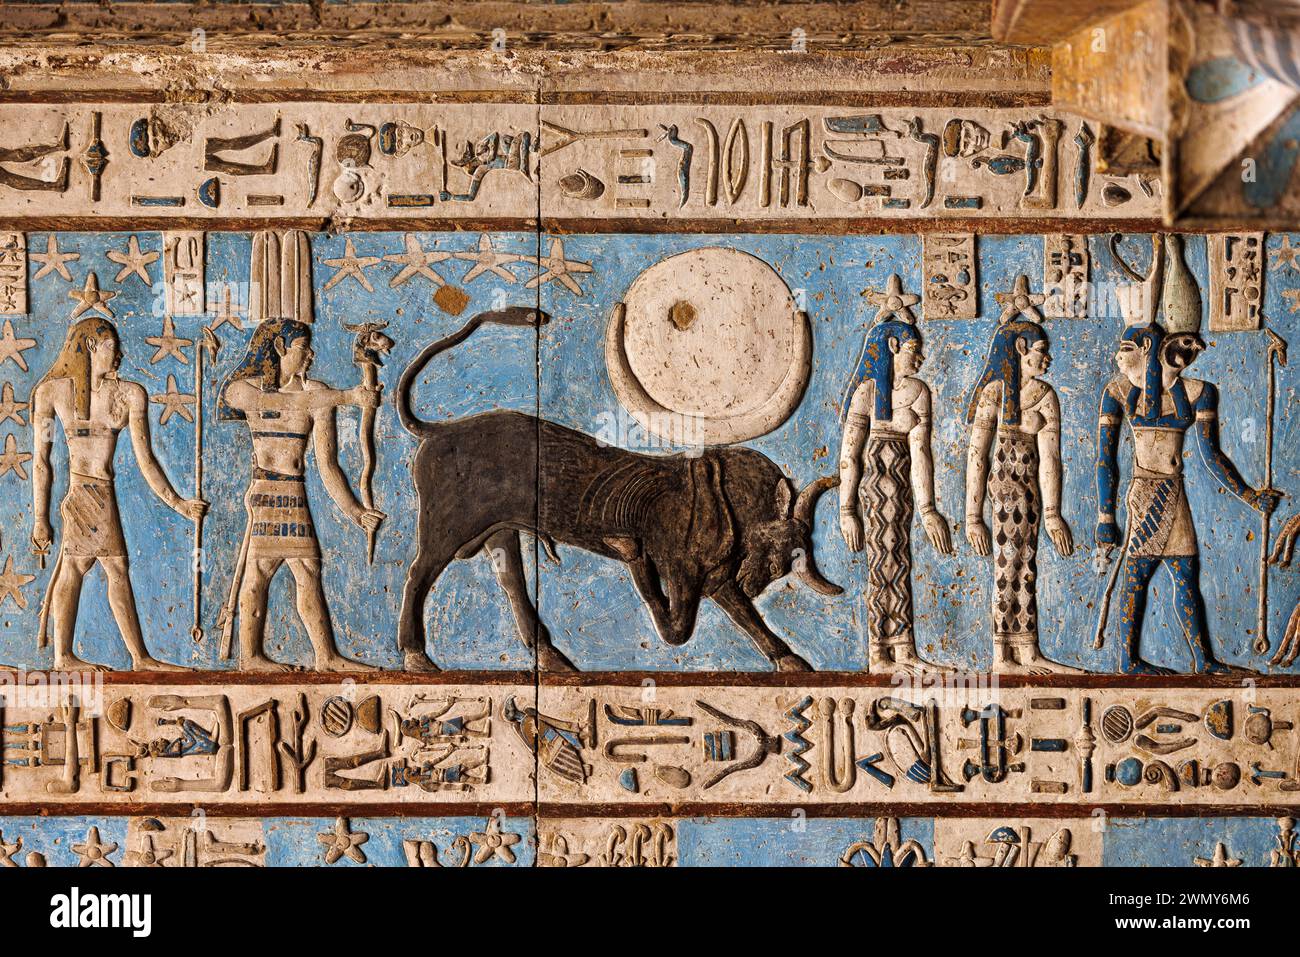 Egypt, Qena, Dendera, Pharaonic temples in Upper Egypt from the Ptolemaic and Roman periods listed as World Heritage by UNESCO, Hathor Temple, hypostyle room ceiling Stock Photo